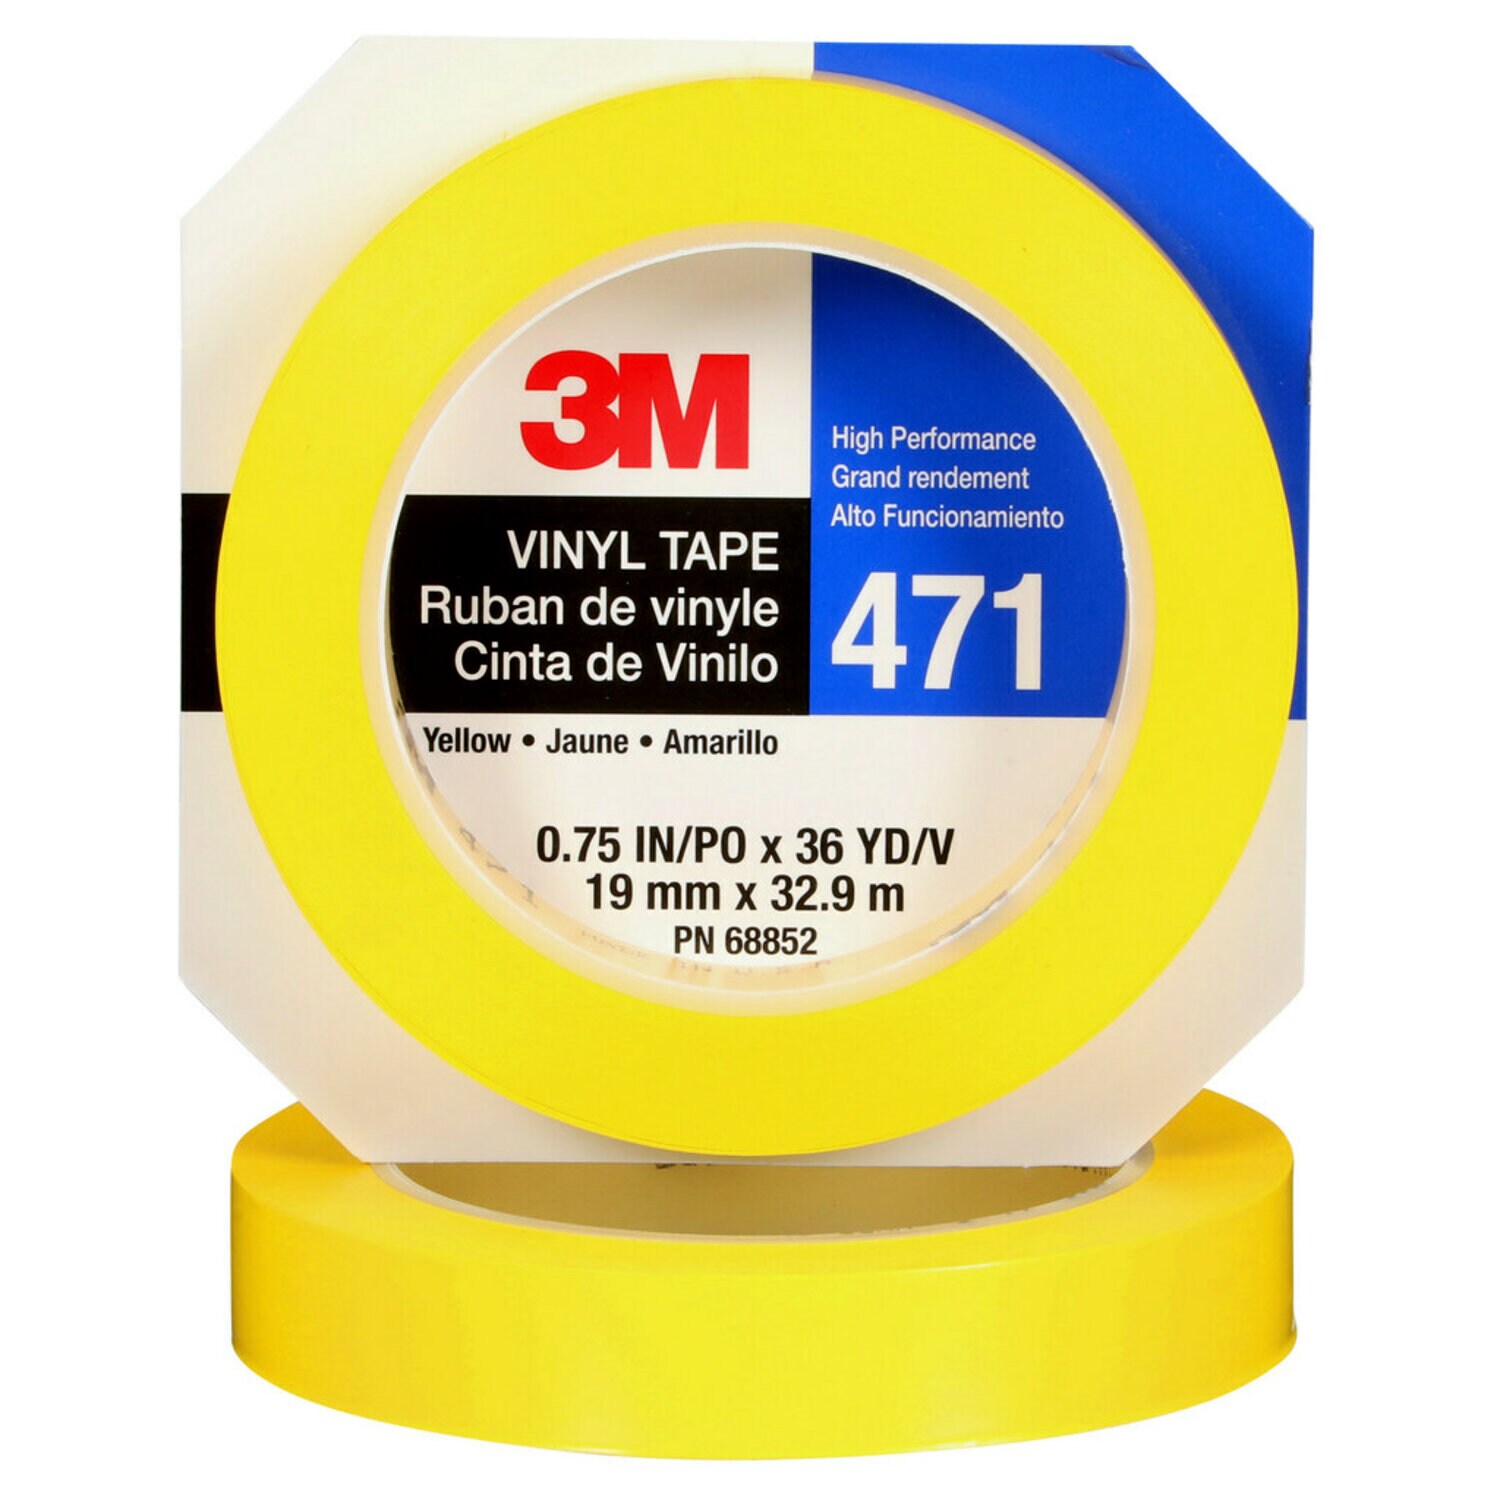 7100044627 - 3M Vinyl Tape 471, Yellow, 3/4 in x 36 yd, 5.2 mil, 48 rolls per case,
Individually Wrapped Conveniently Packaged